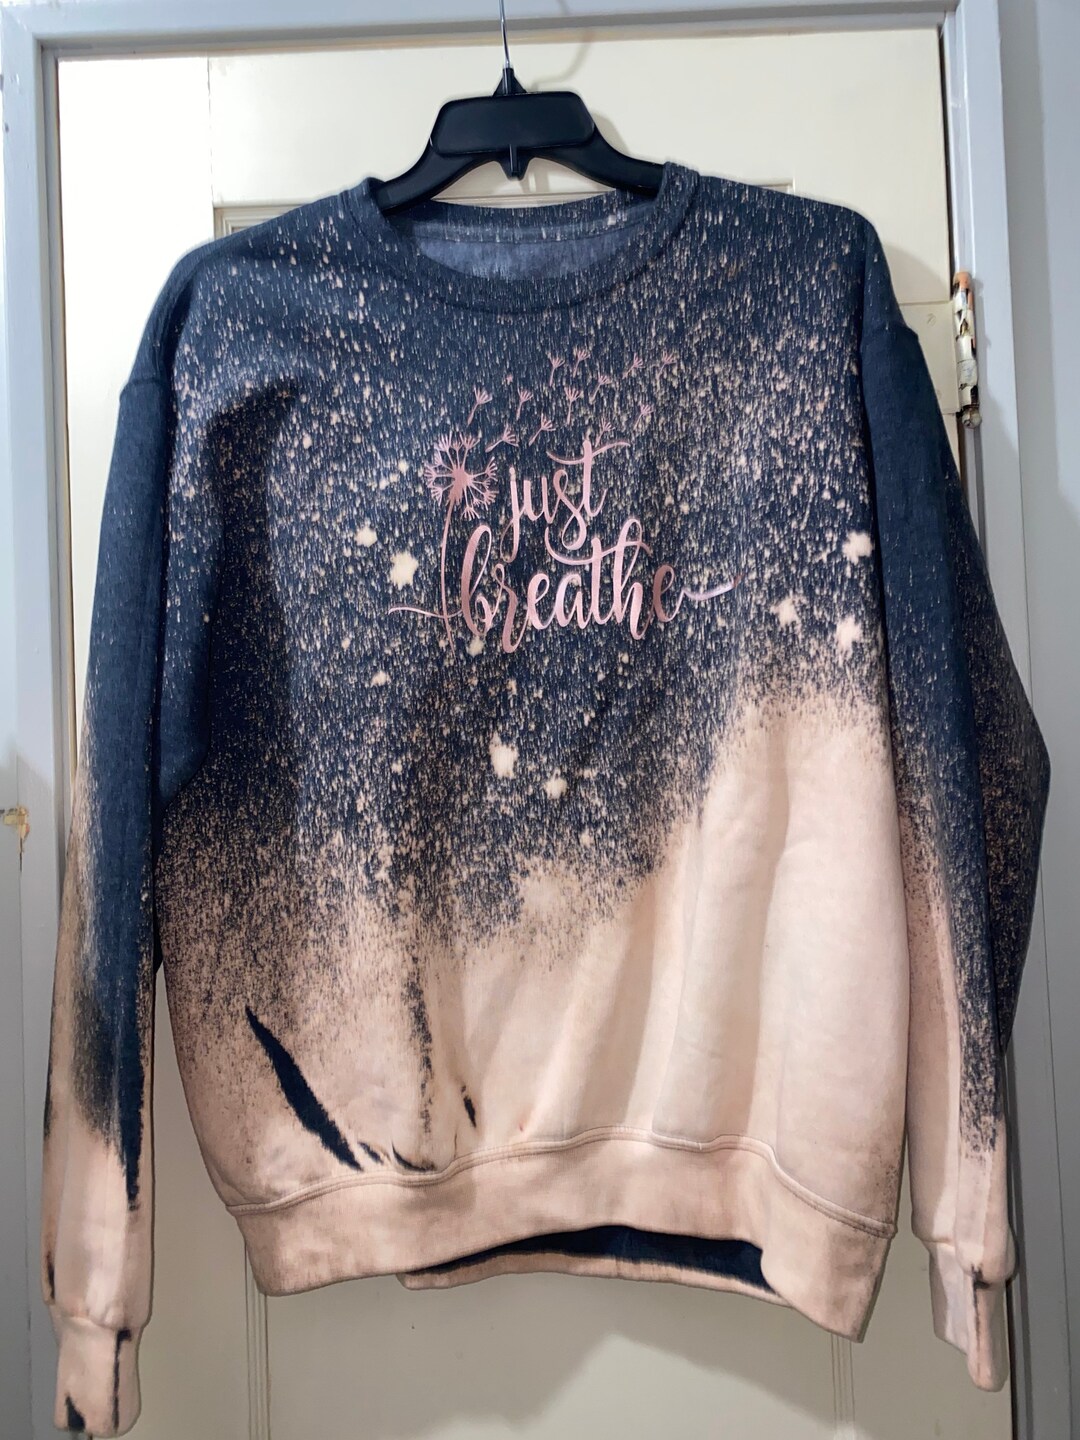 Ombre Bleached Crew Neck Sweatshirt That Says Just Breath - Etsy